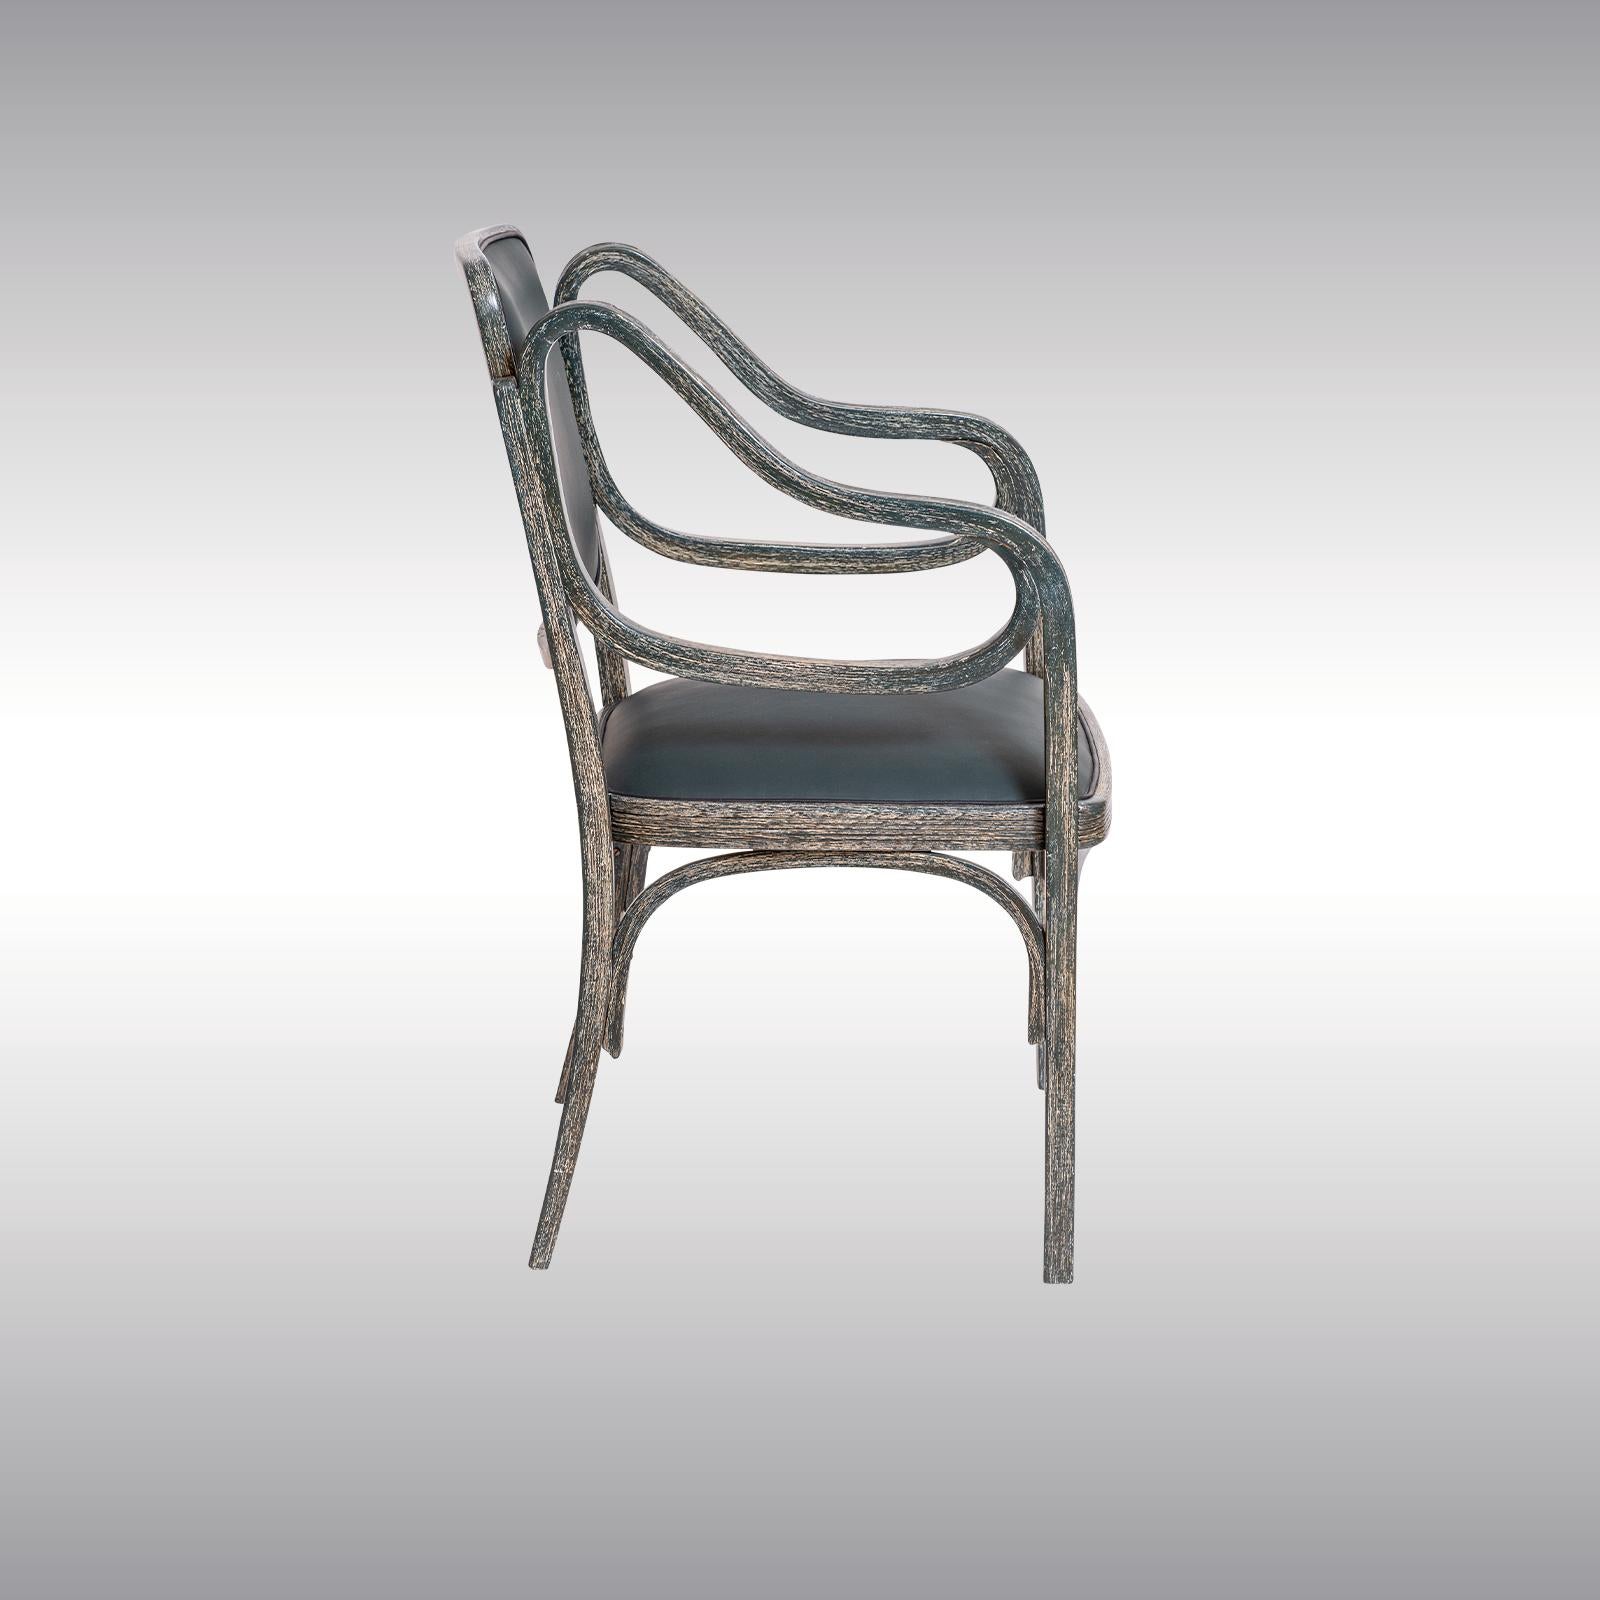 Austrian Original of Time Otto Wagner Armchair 1901 Jugendstil, Secession Style, 1901 For Sale